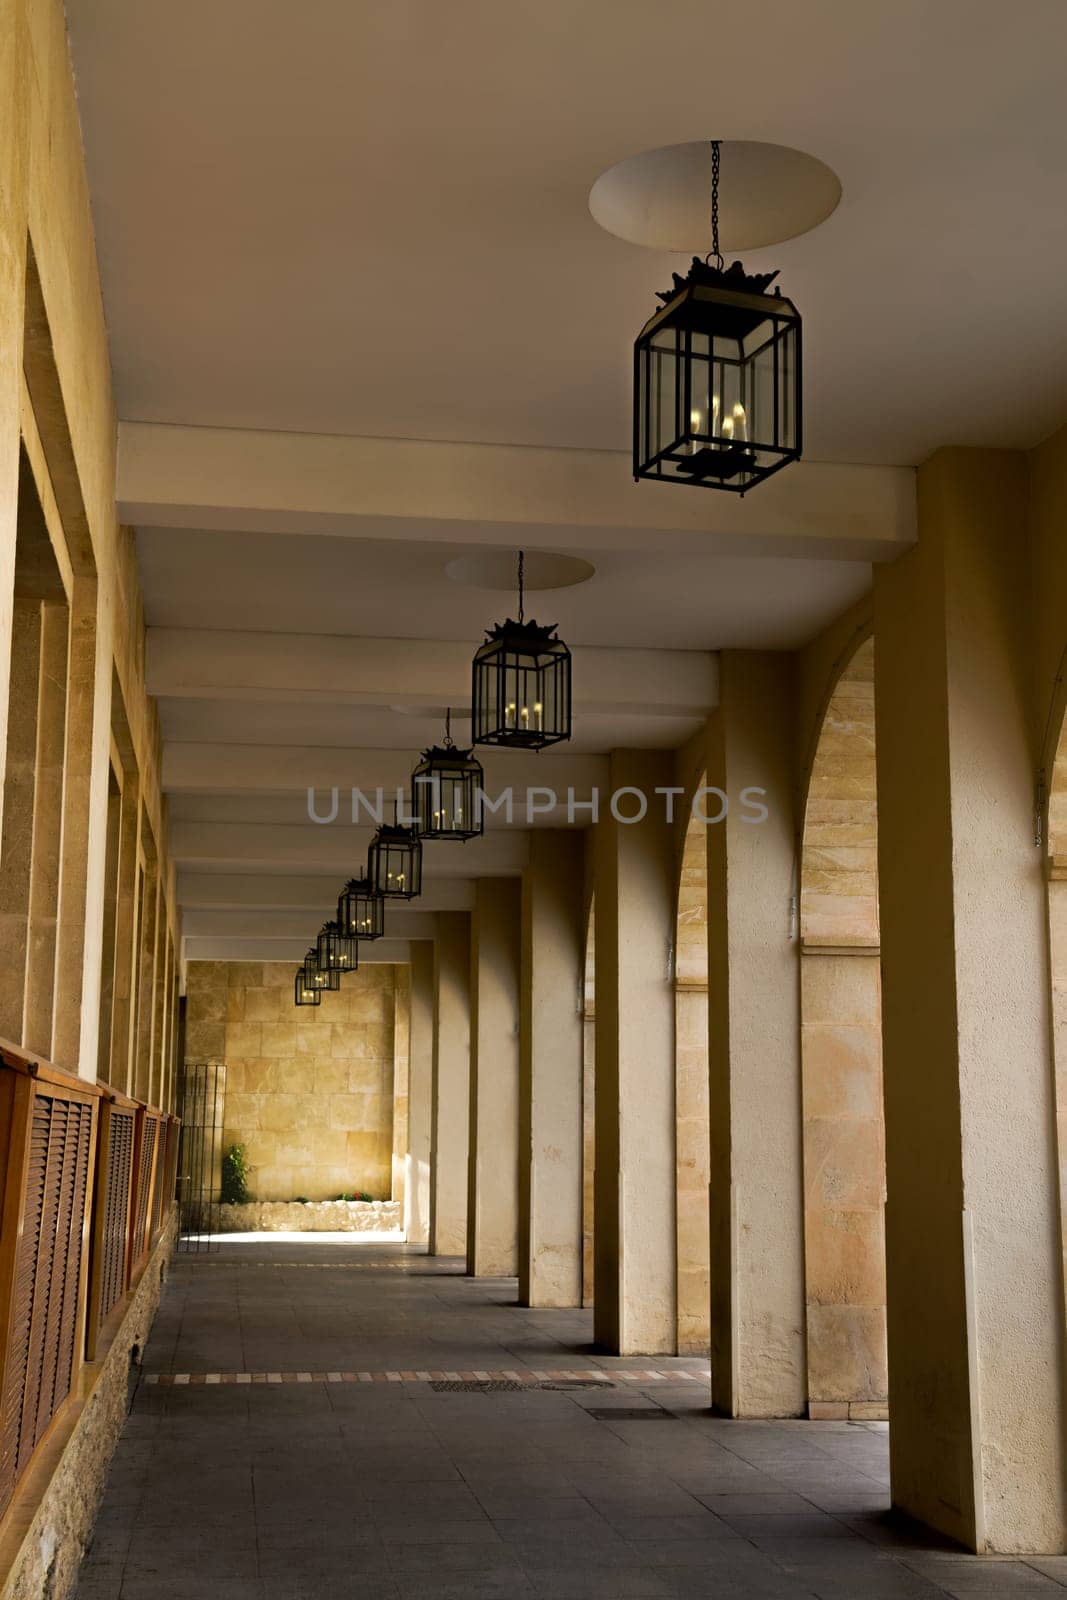 hallway with arches and lighted ceiling lamps with sunlight in the background